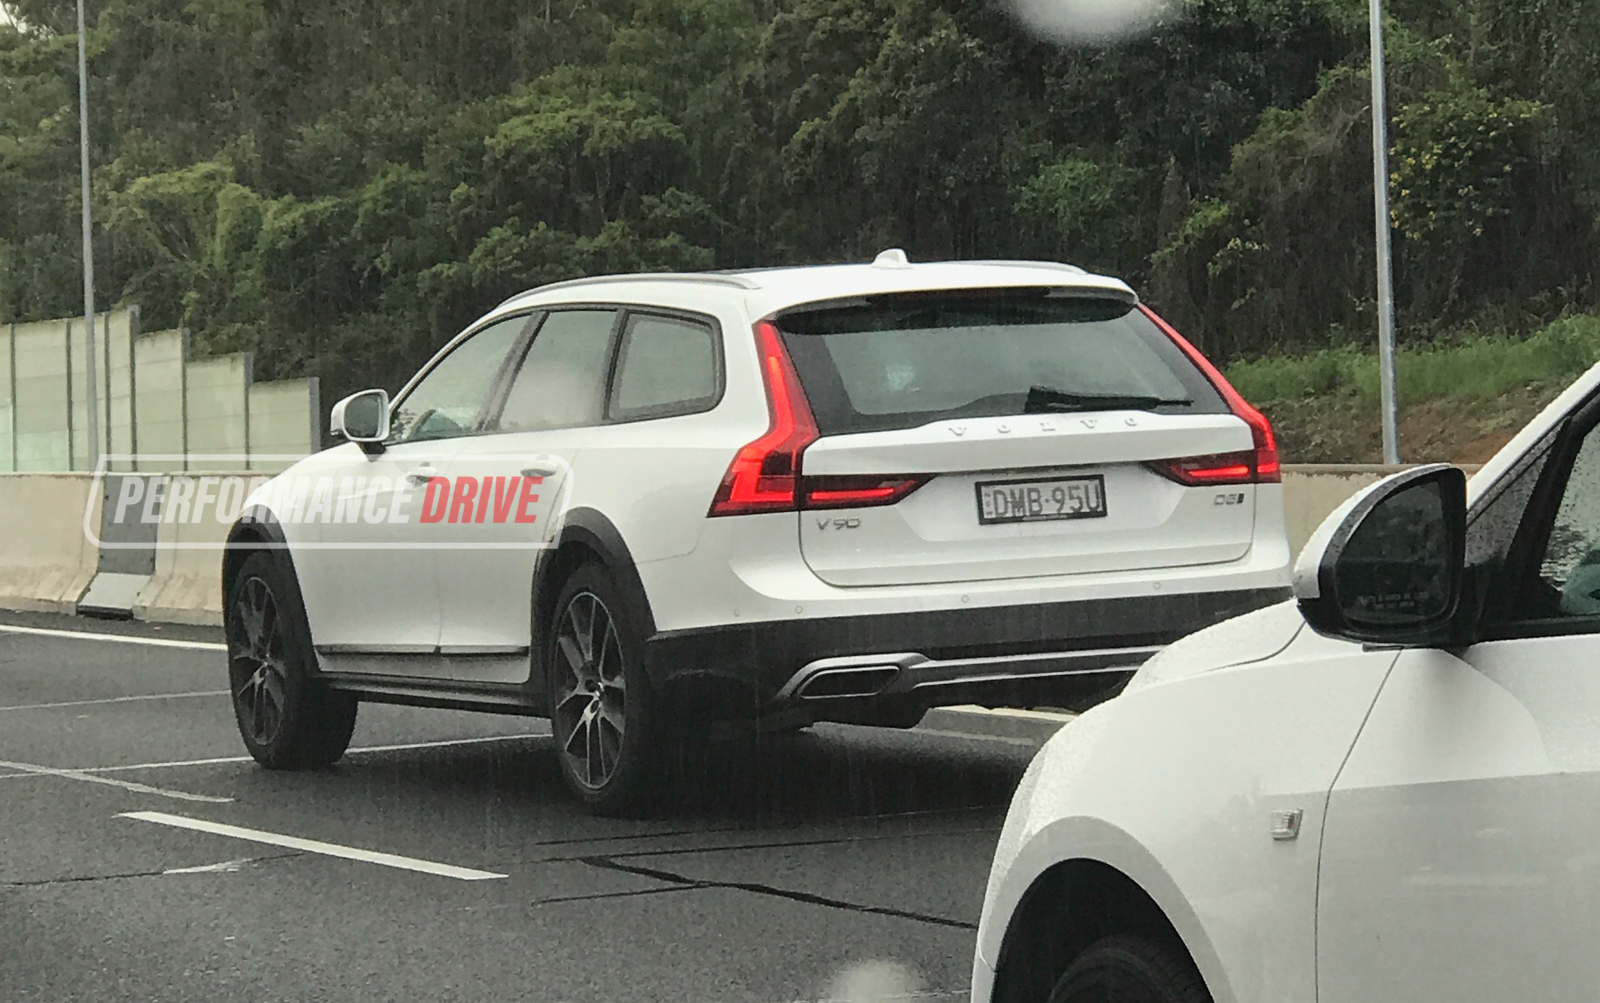 2017 Volvo V90 Cross Country spotted in Australia, to be priced from $110,000